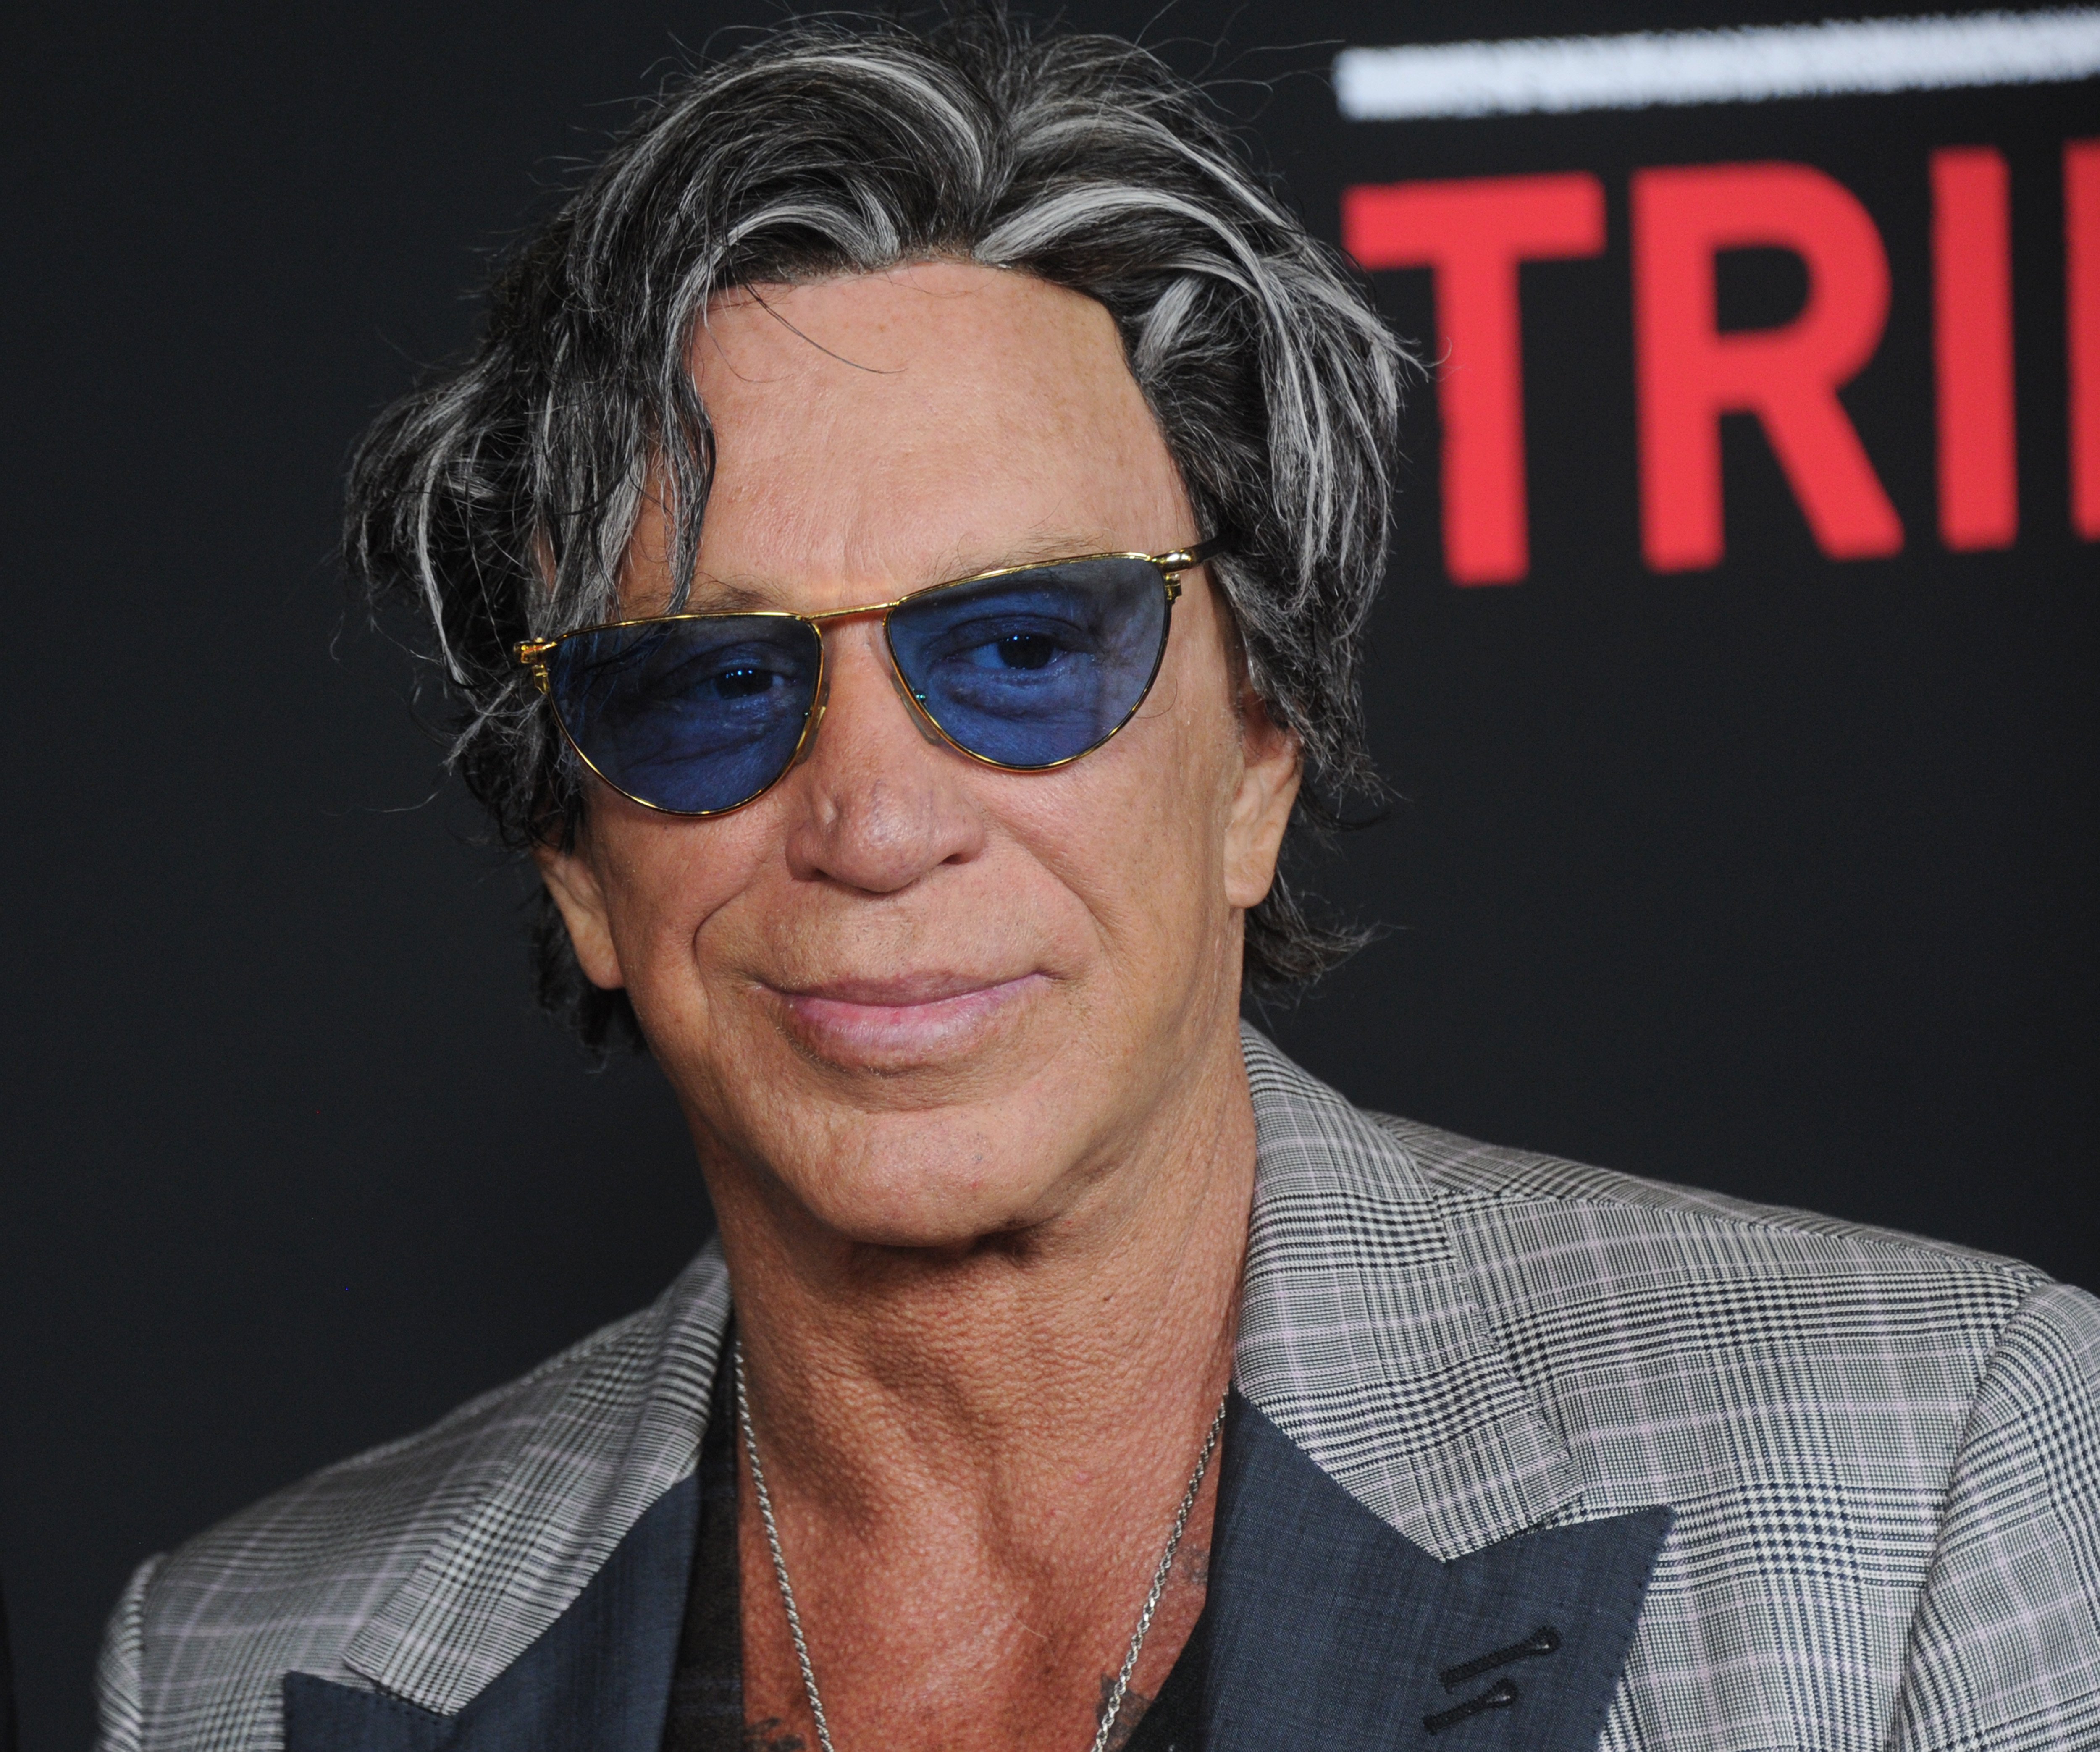 Actor Mickey Rourke arrives at the premiere of Open Road's "Triple 9" at Regal Cinemas LA Live on February 16, 2016 in Los Angeles, California.  |  Source: Getty Images